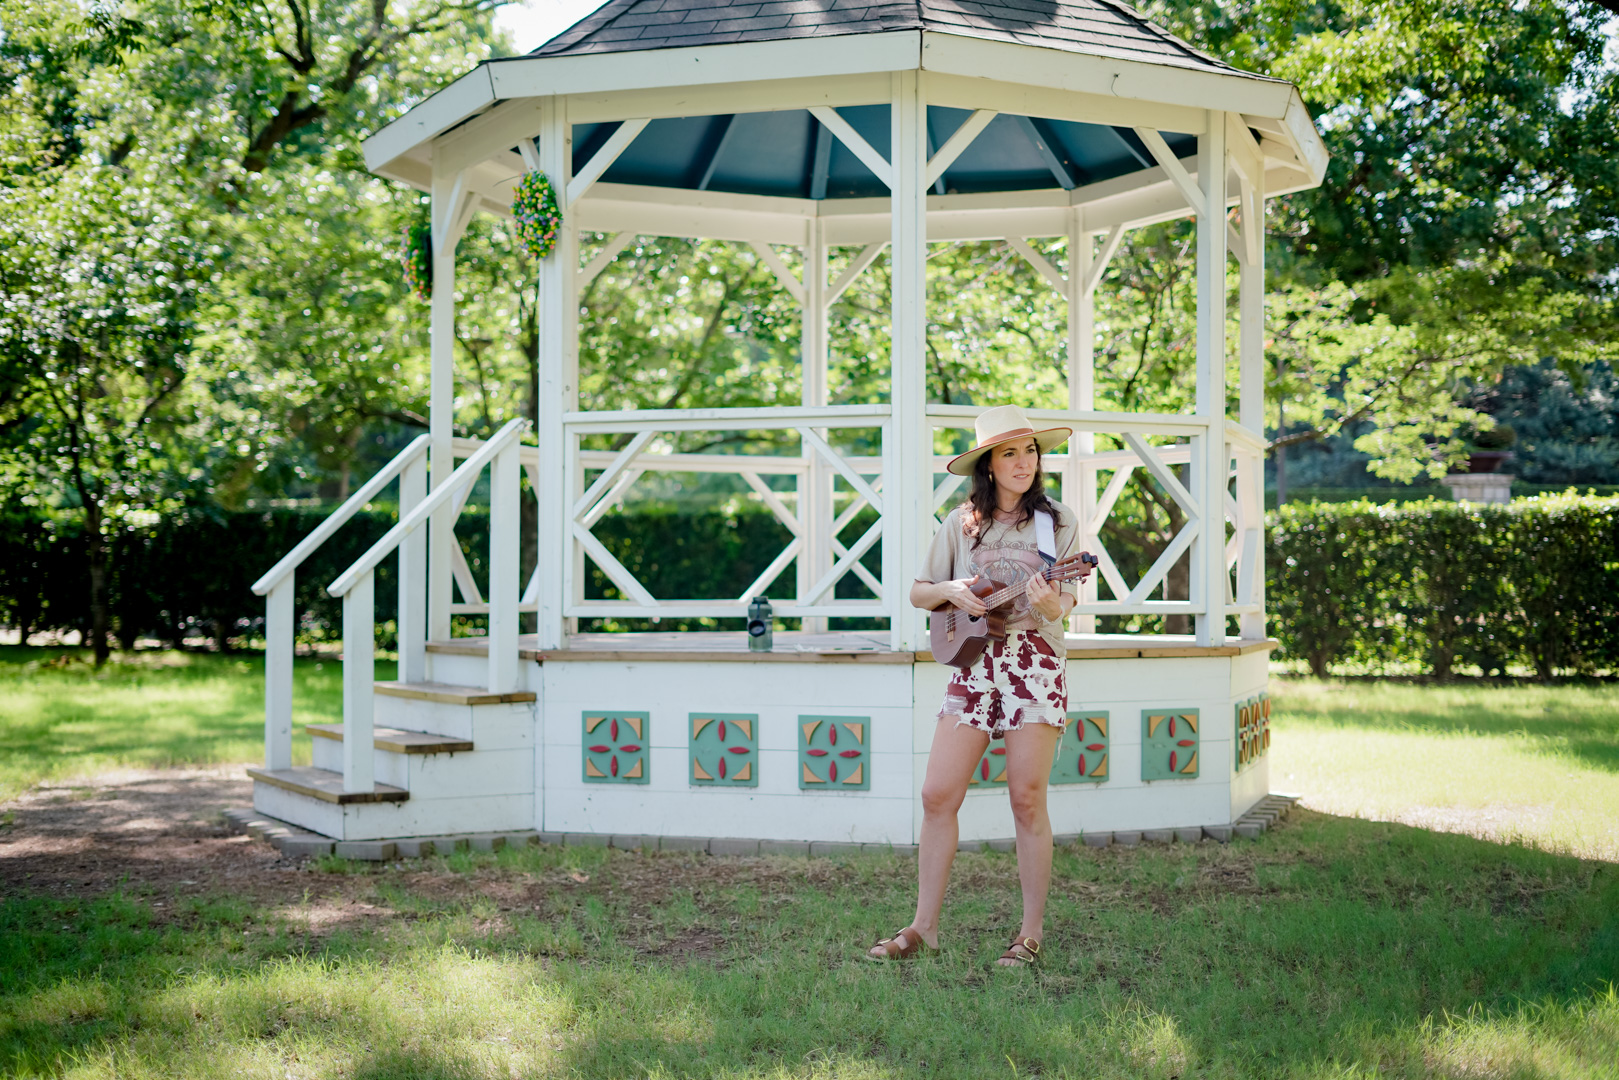 A woman playing ukulele in front of a gazebo 